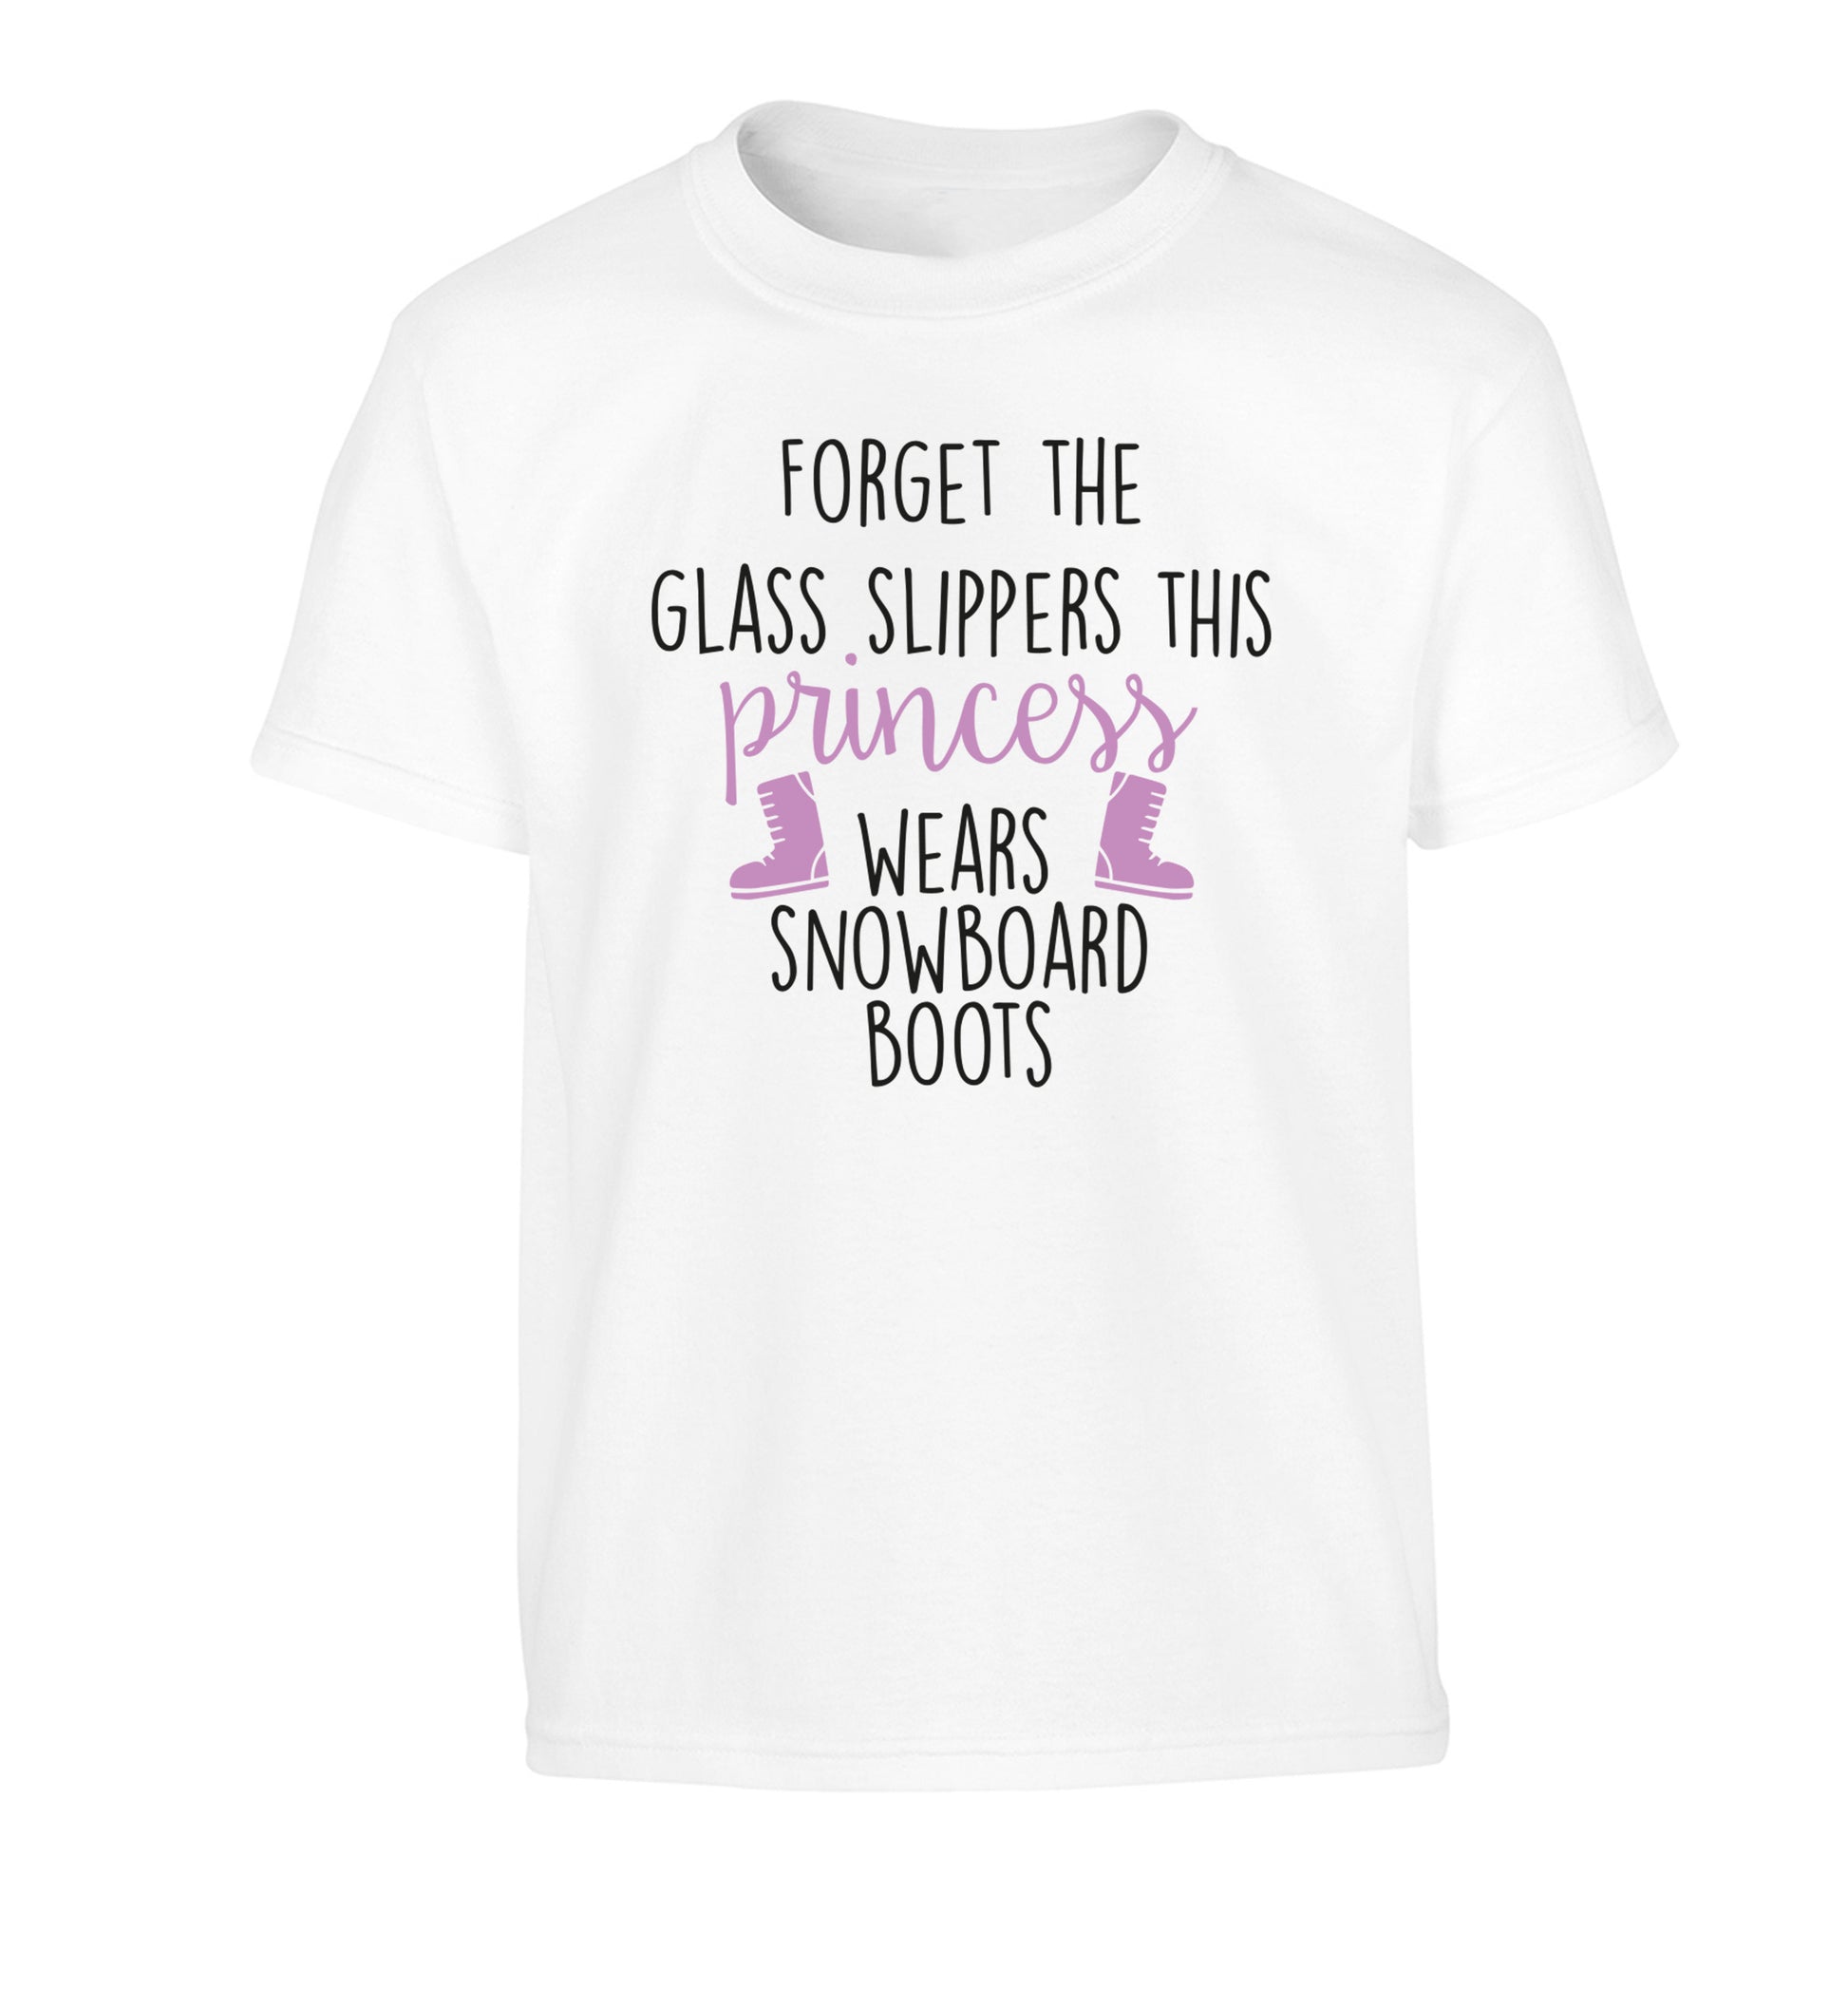 Forget the glass slippers this princess wears snowboard boots Children's white Tshirt 12-14 Years